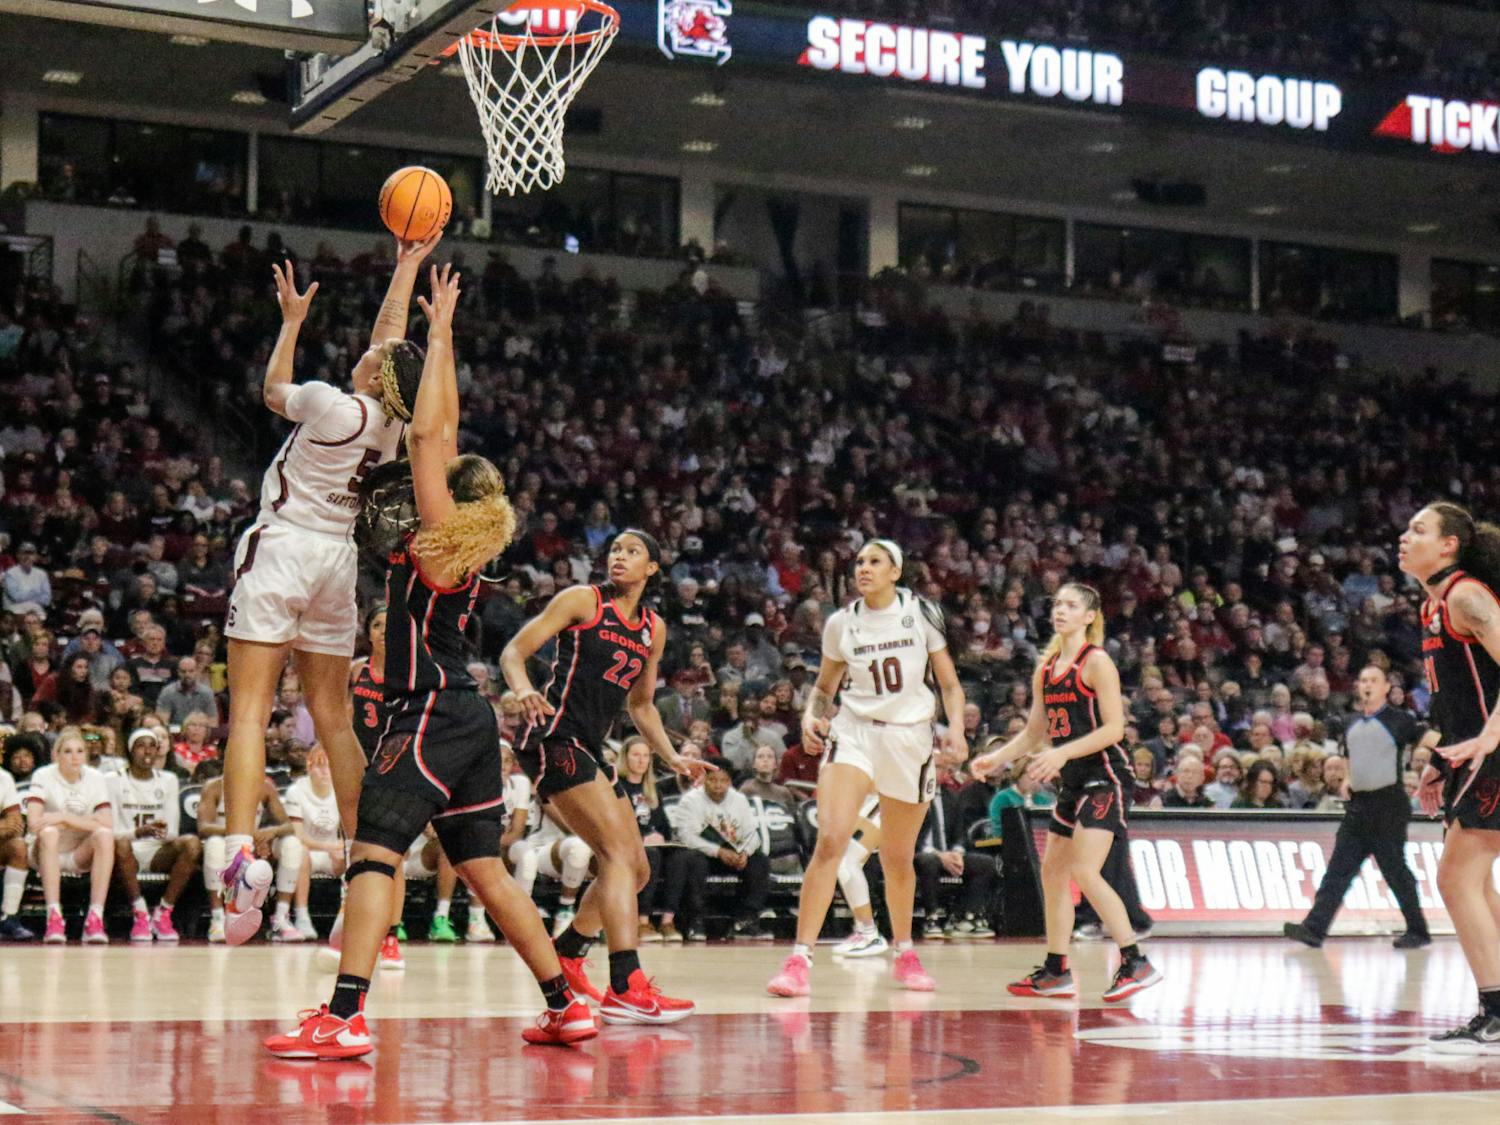 Senior forward Victaria Saxton goes for a layup during South Carolina’s game against Georgia at Colonial Life Arena on Feb. 26, 2023. The Gamecocks beat the Bulldogs 73-63.